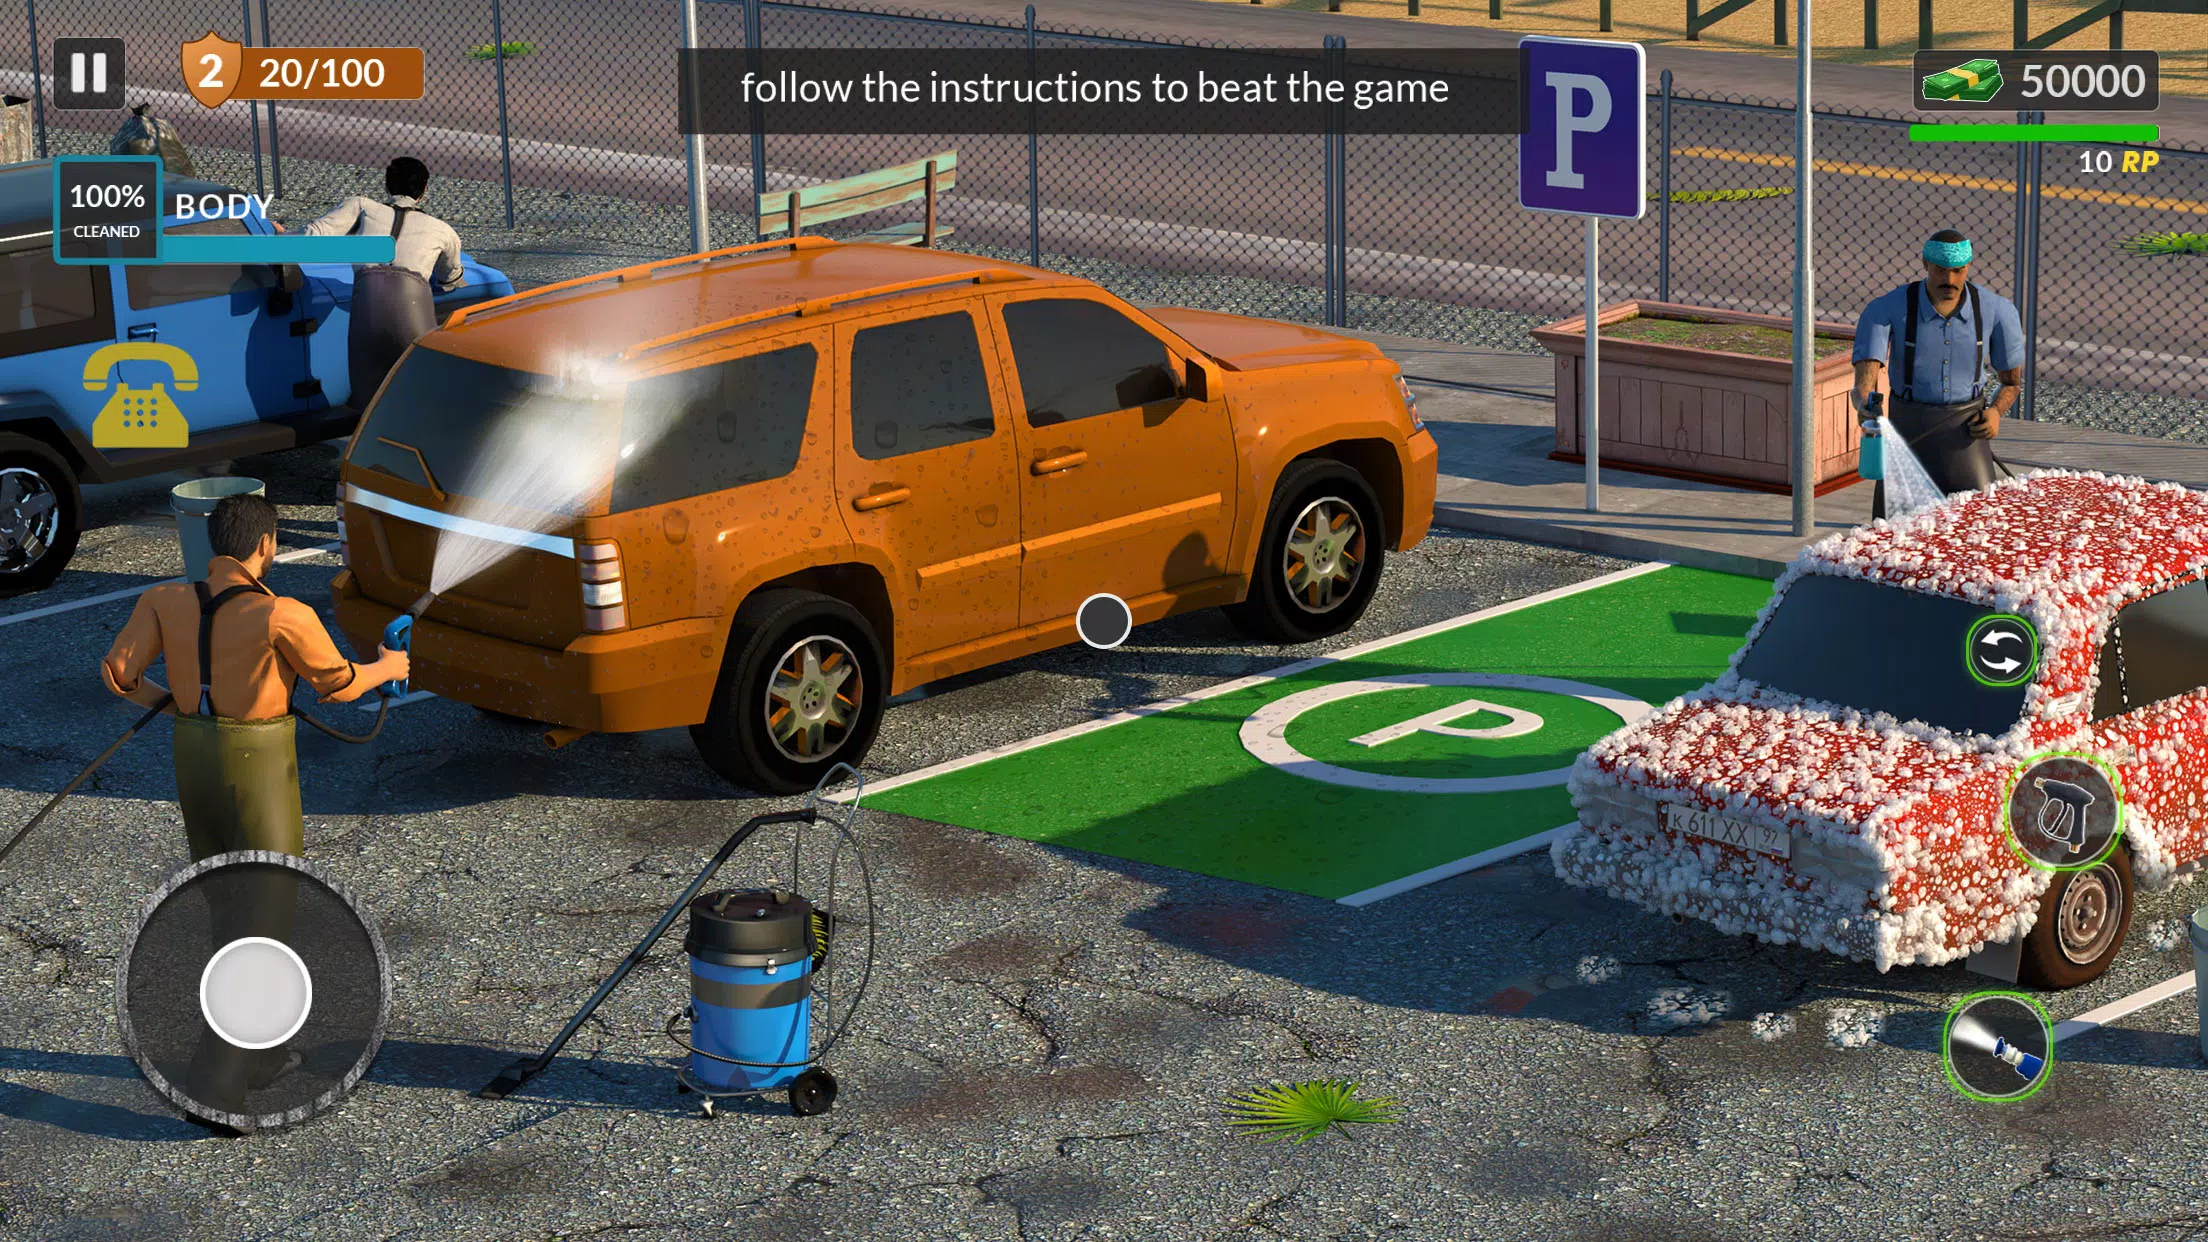 Download Power Washing - Car Wash Games on PC with MEmu